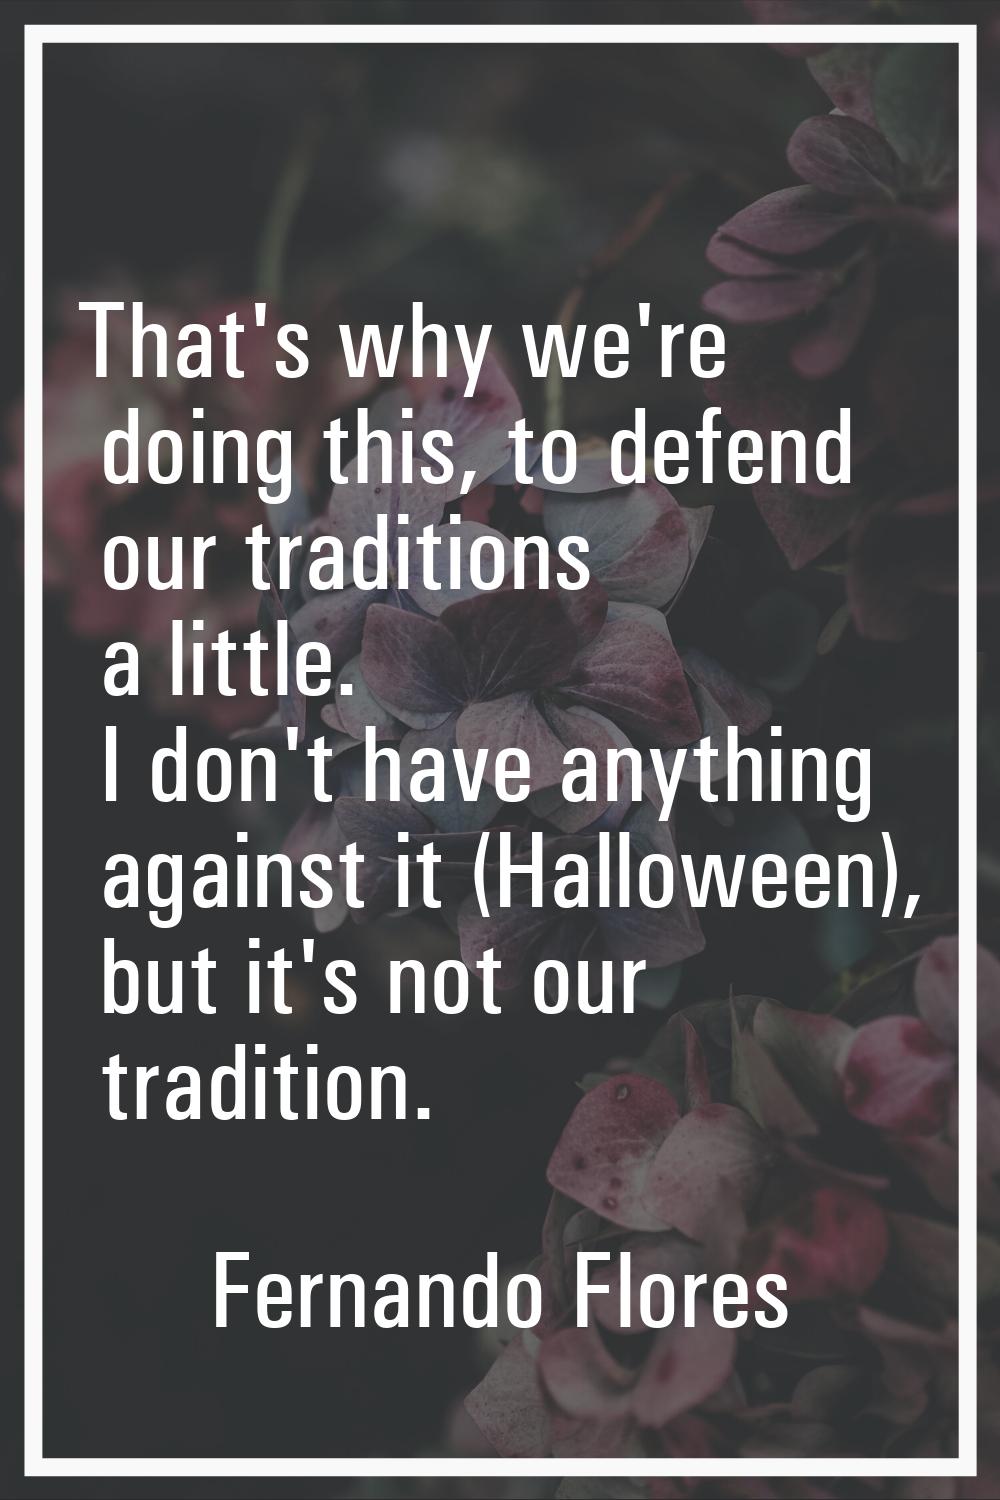 That's why we're doing this, to defend our traditions a little. I don't have anything against it (H